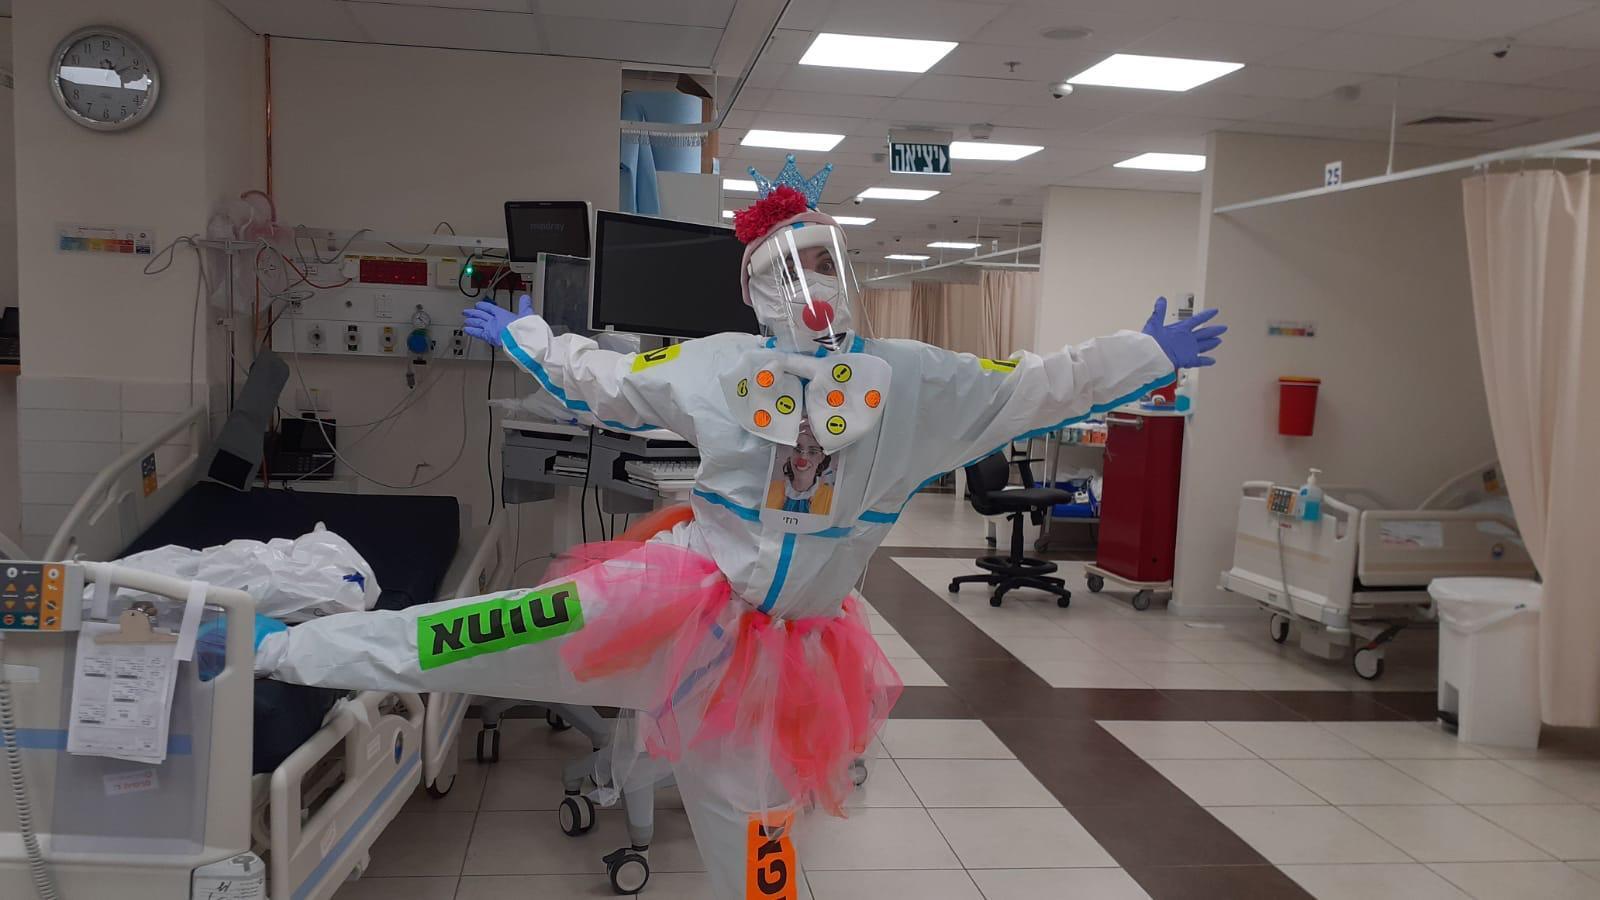 Leah Weiss, who is also a medial clown named Rosie, has been working in the COVID-19 ward of a Jerusalem hospital most of this year.